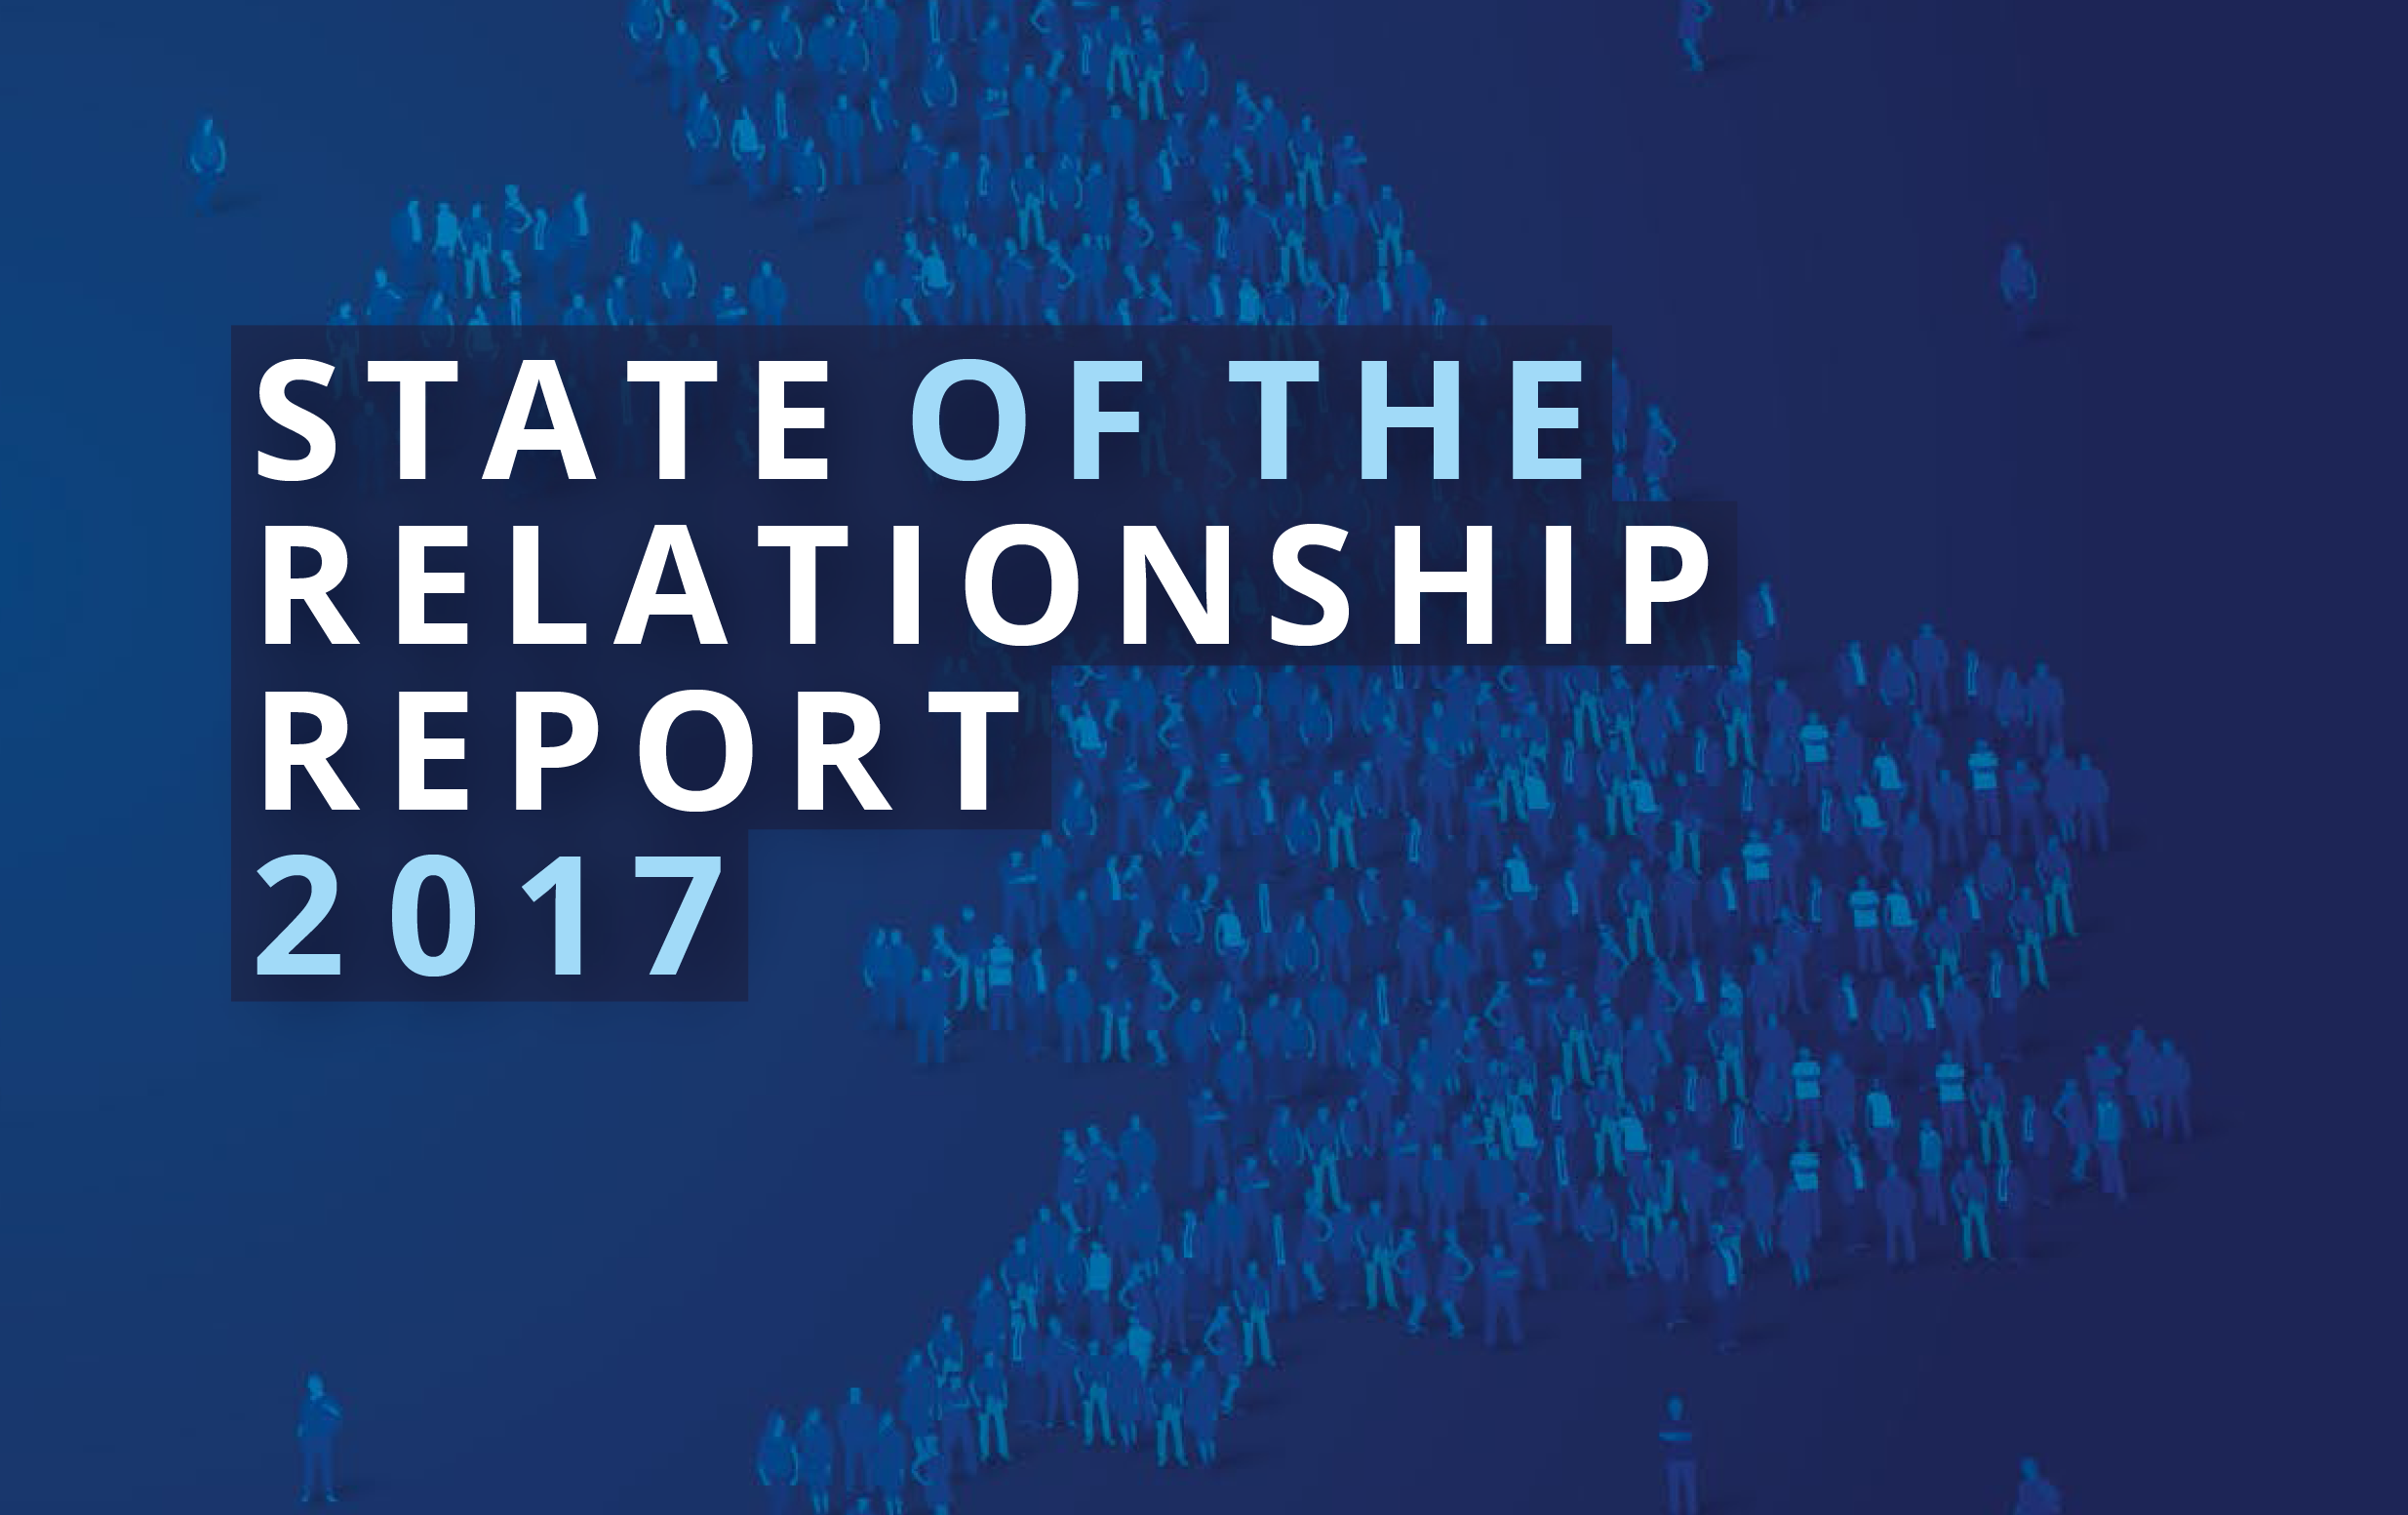 Partner news: 2017 State of the Relationship report highlights partnership between Leeds and DePuy Synthes